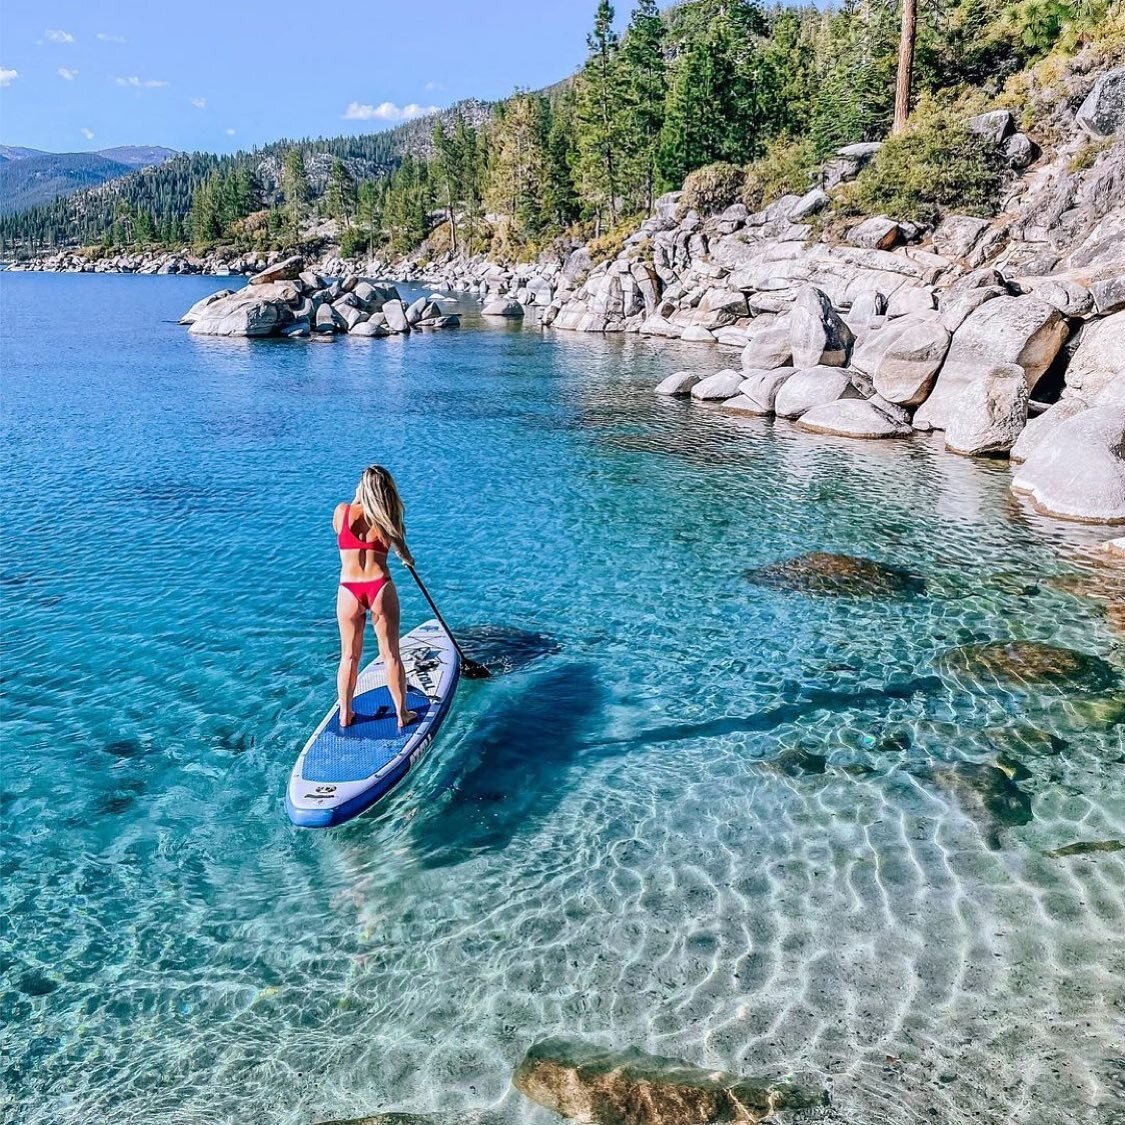 Summer ☀️ arrivals landing over the next few weeks! We&rsquo;ll post here to let you know first 👙 💕☀️ In the meantime who&rsquo;s getting the paddle board out this week?
.
.
.
📸: @trisarahcat 
#tahoe #laketahoe #tahoecity #shoplocally #shoplocally